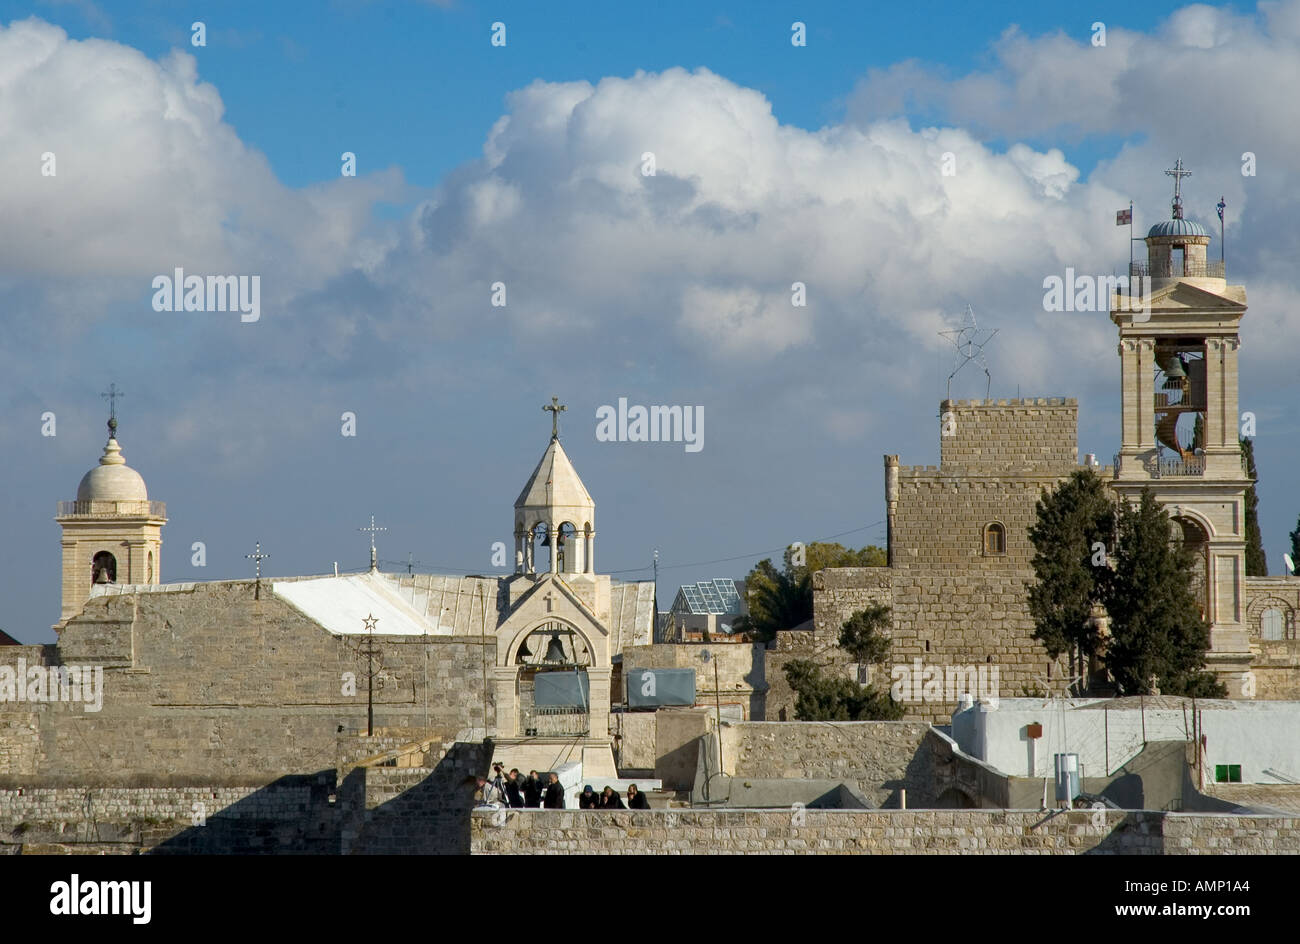 Palestinian Authority Bethlehem church of the Nativity close up of spires with threatning skies Stock Photo